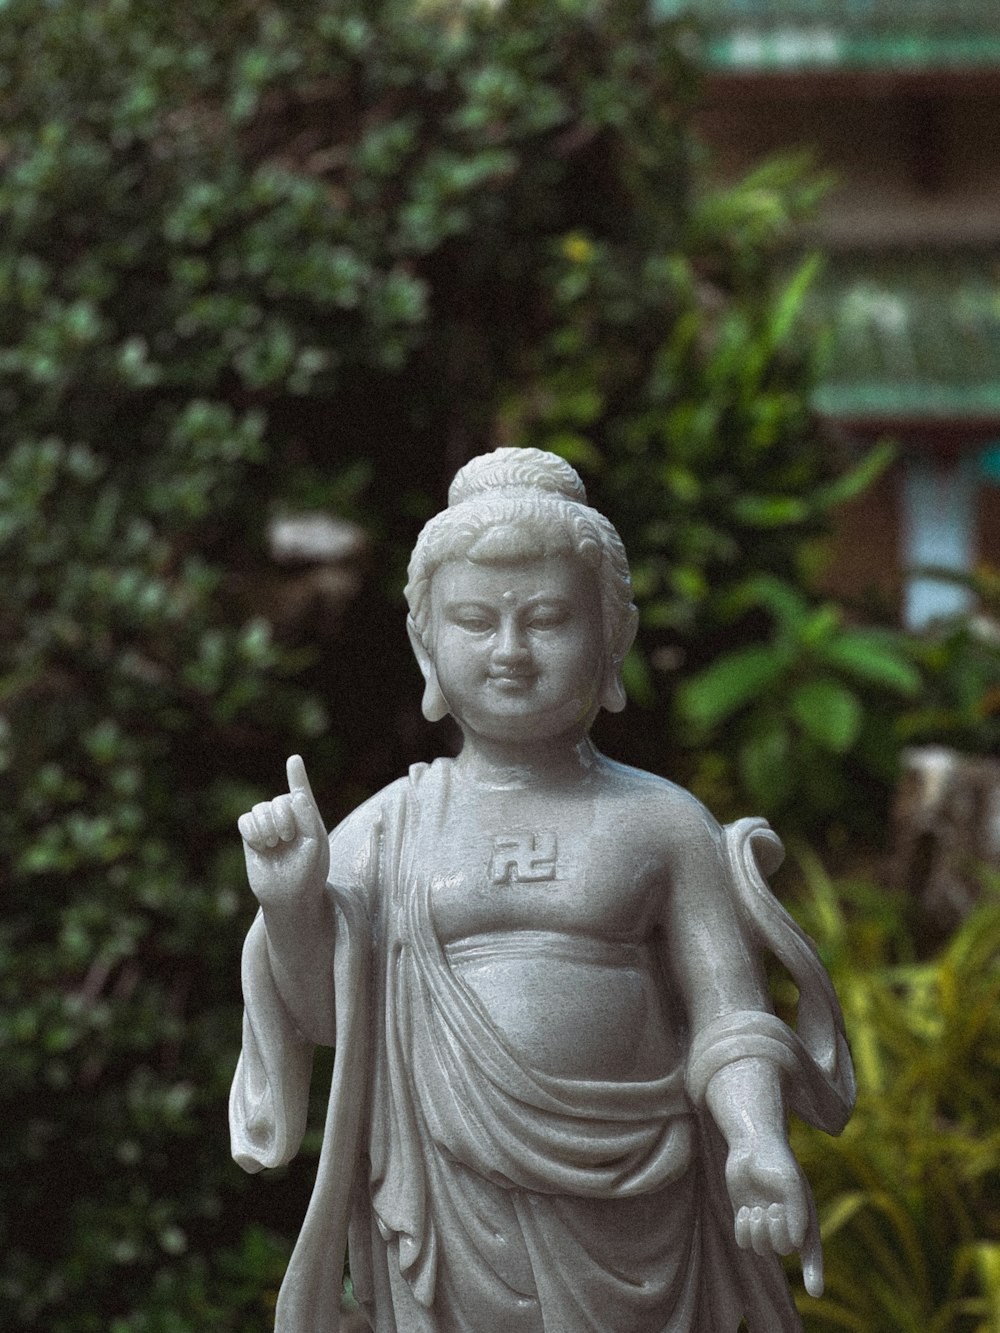 a statue of a buddha holding a peace sign